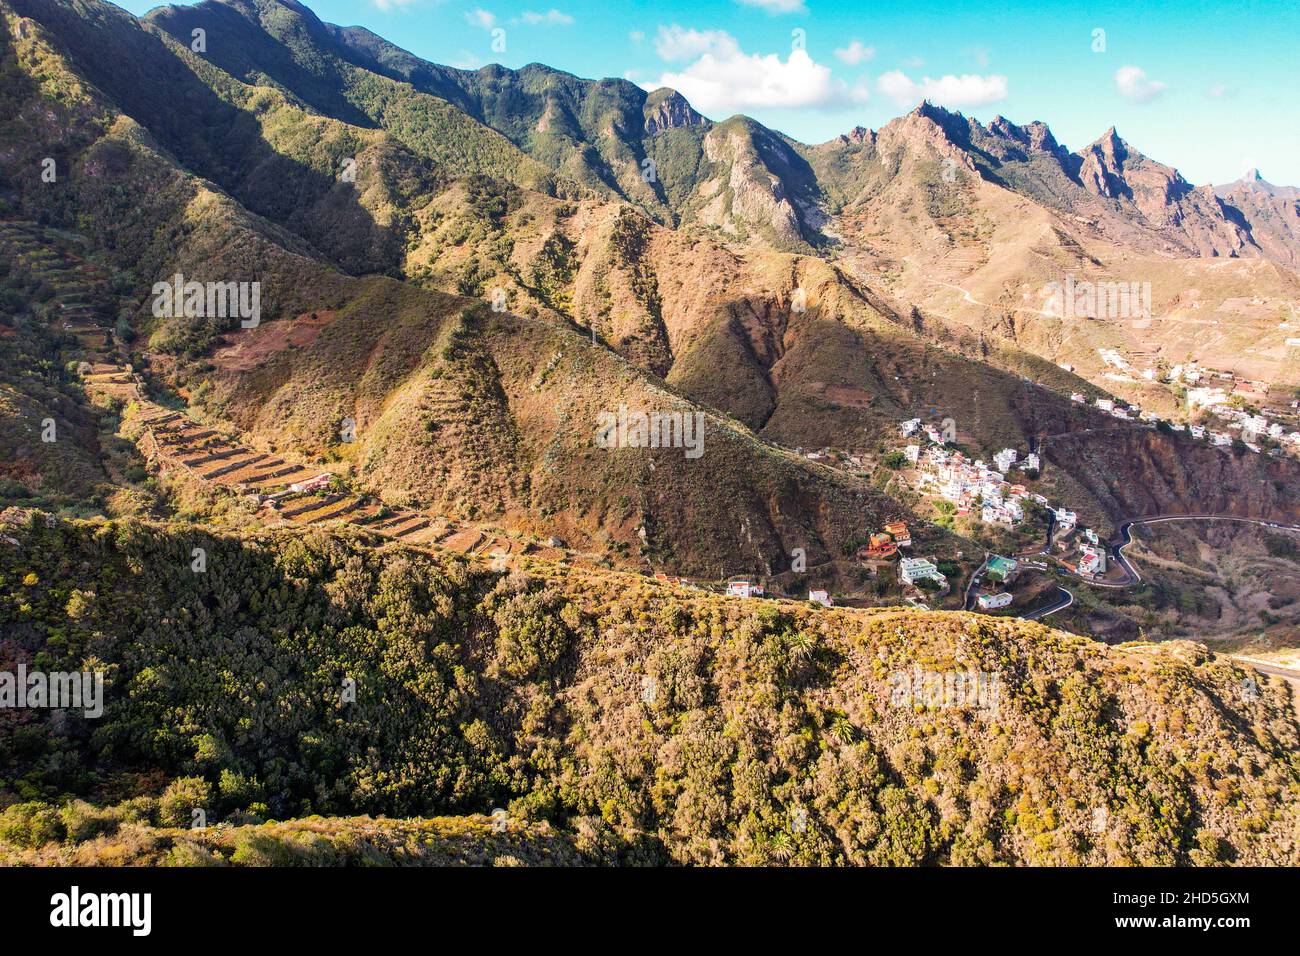 A beautiful view of the Anaga Mountains. Tenerife, Canary Islands, Spain Stock Photo